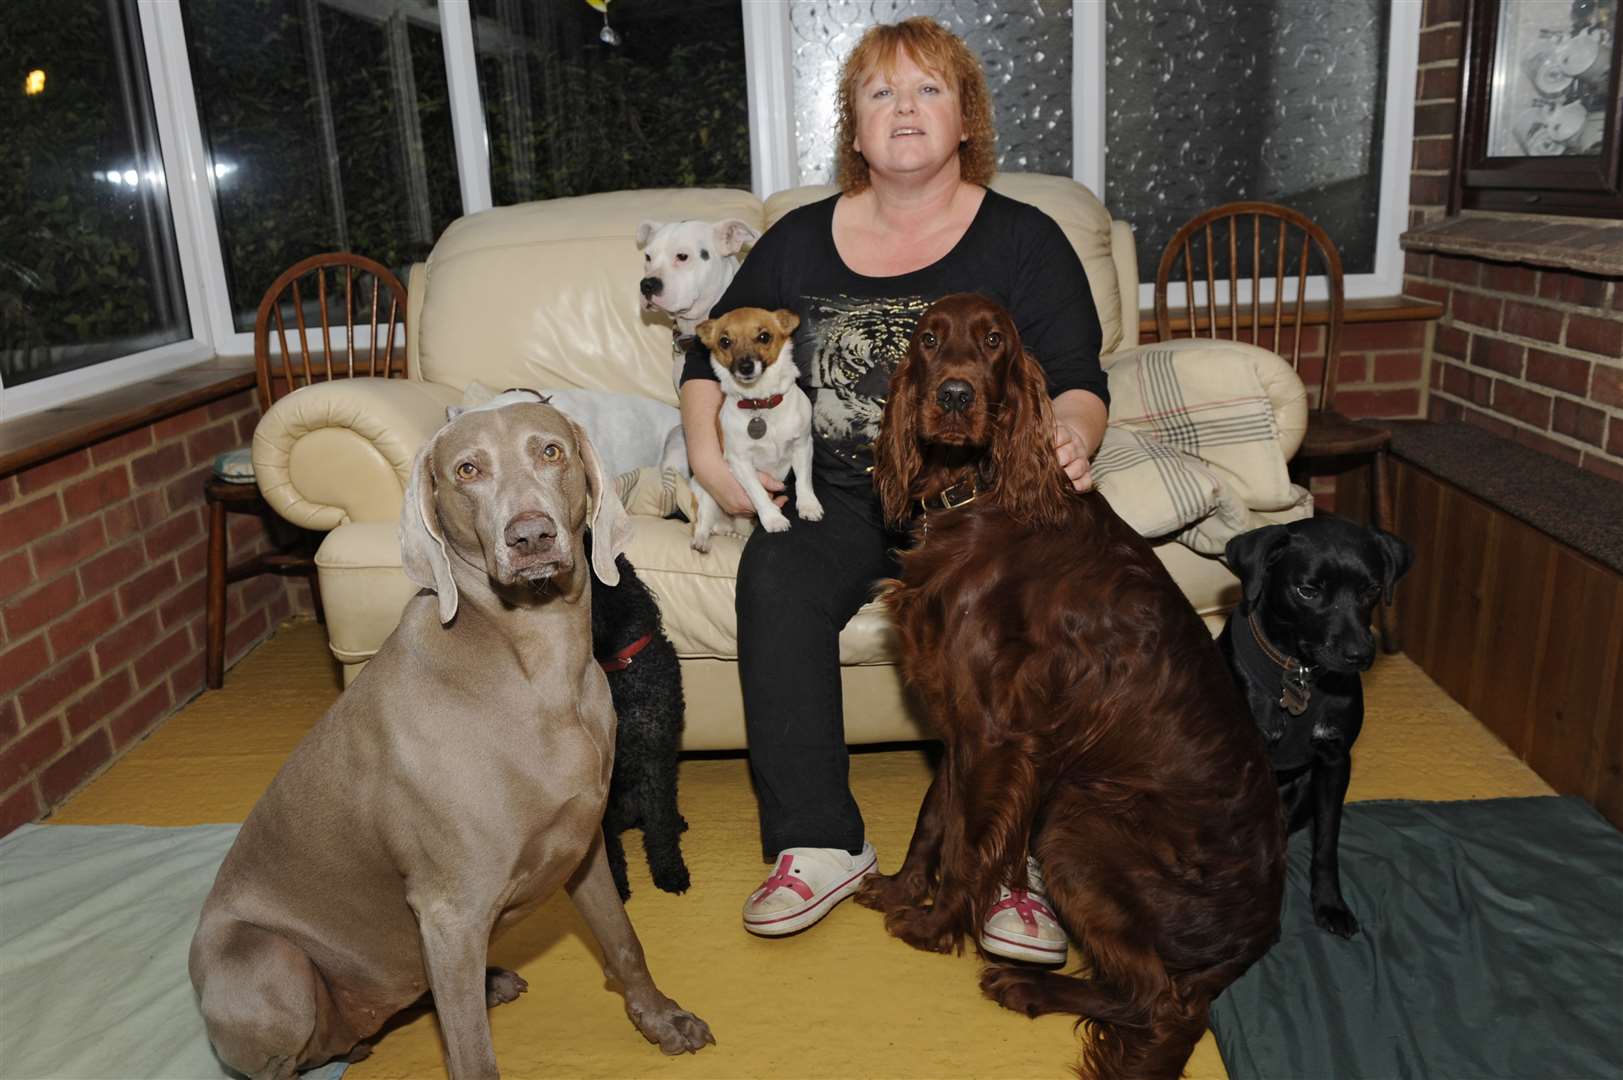 Sharon Russell, owner of dog boarding business in Worth could lose her livelihood if planning refused.